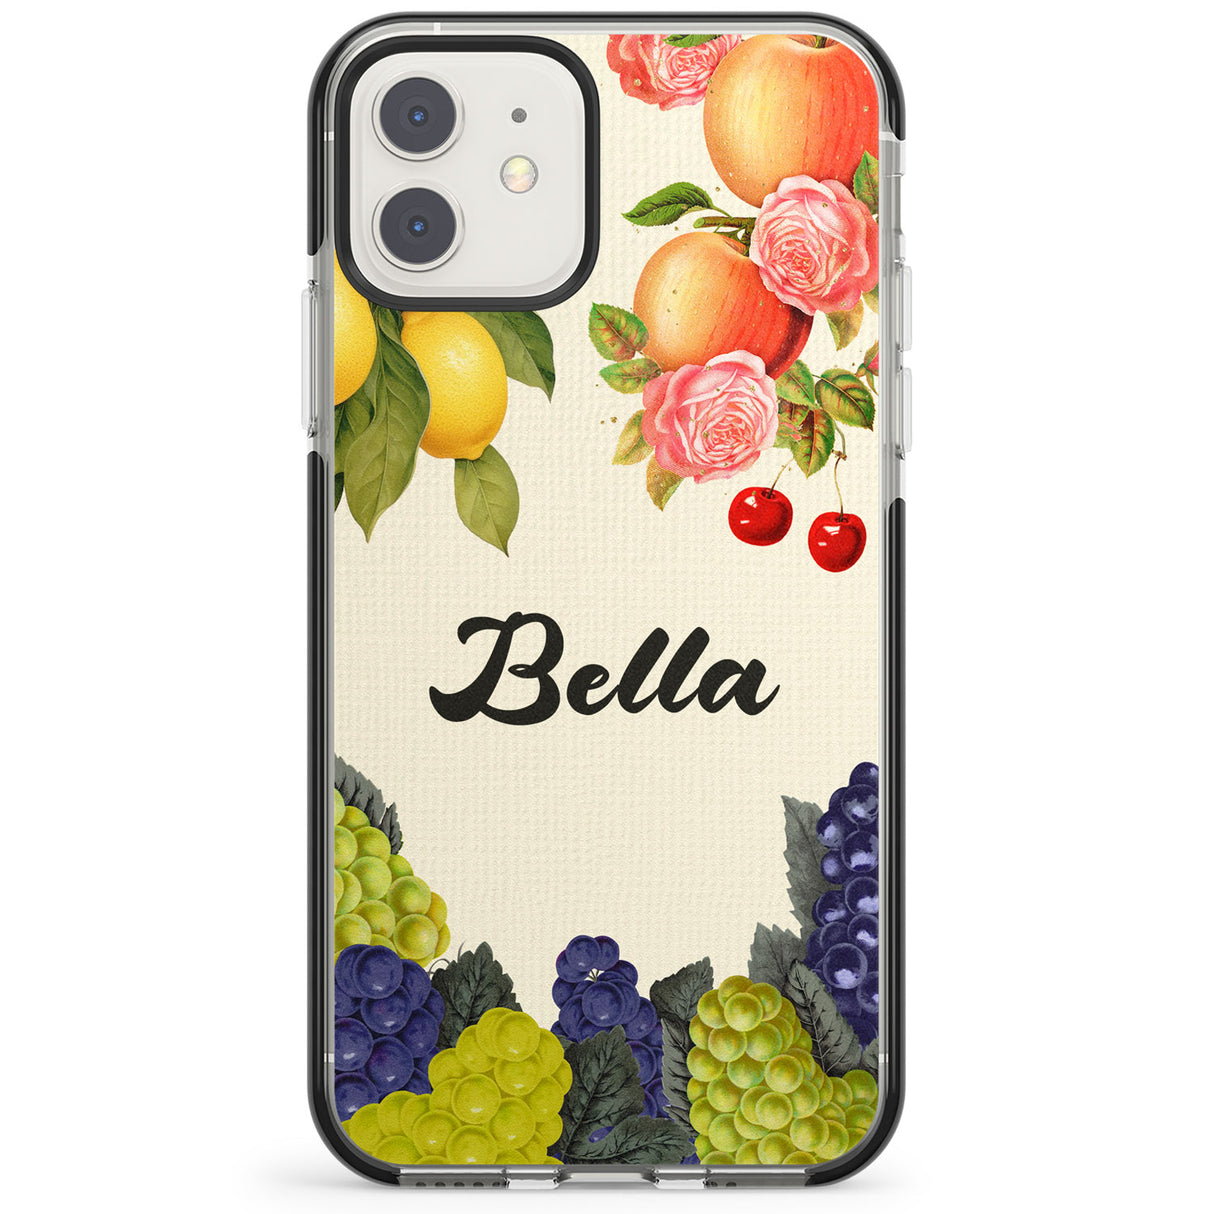 Personalised Vintage Fruits Impact Phone Case for iPhone 11, iphone 12